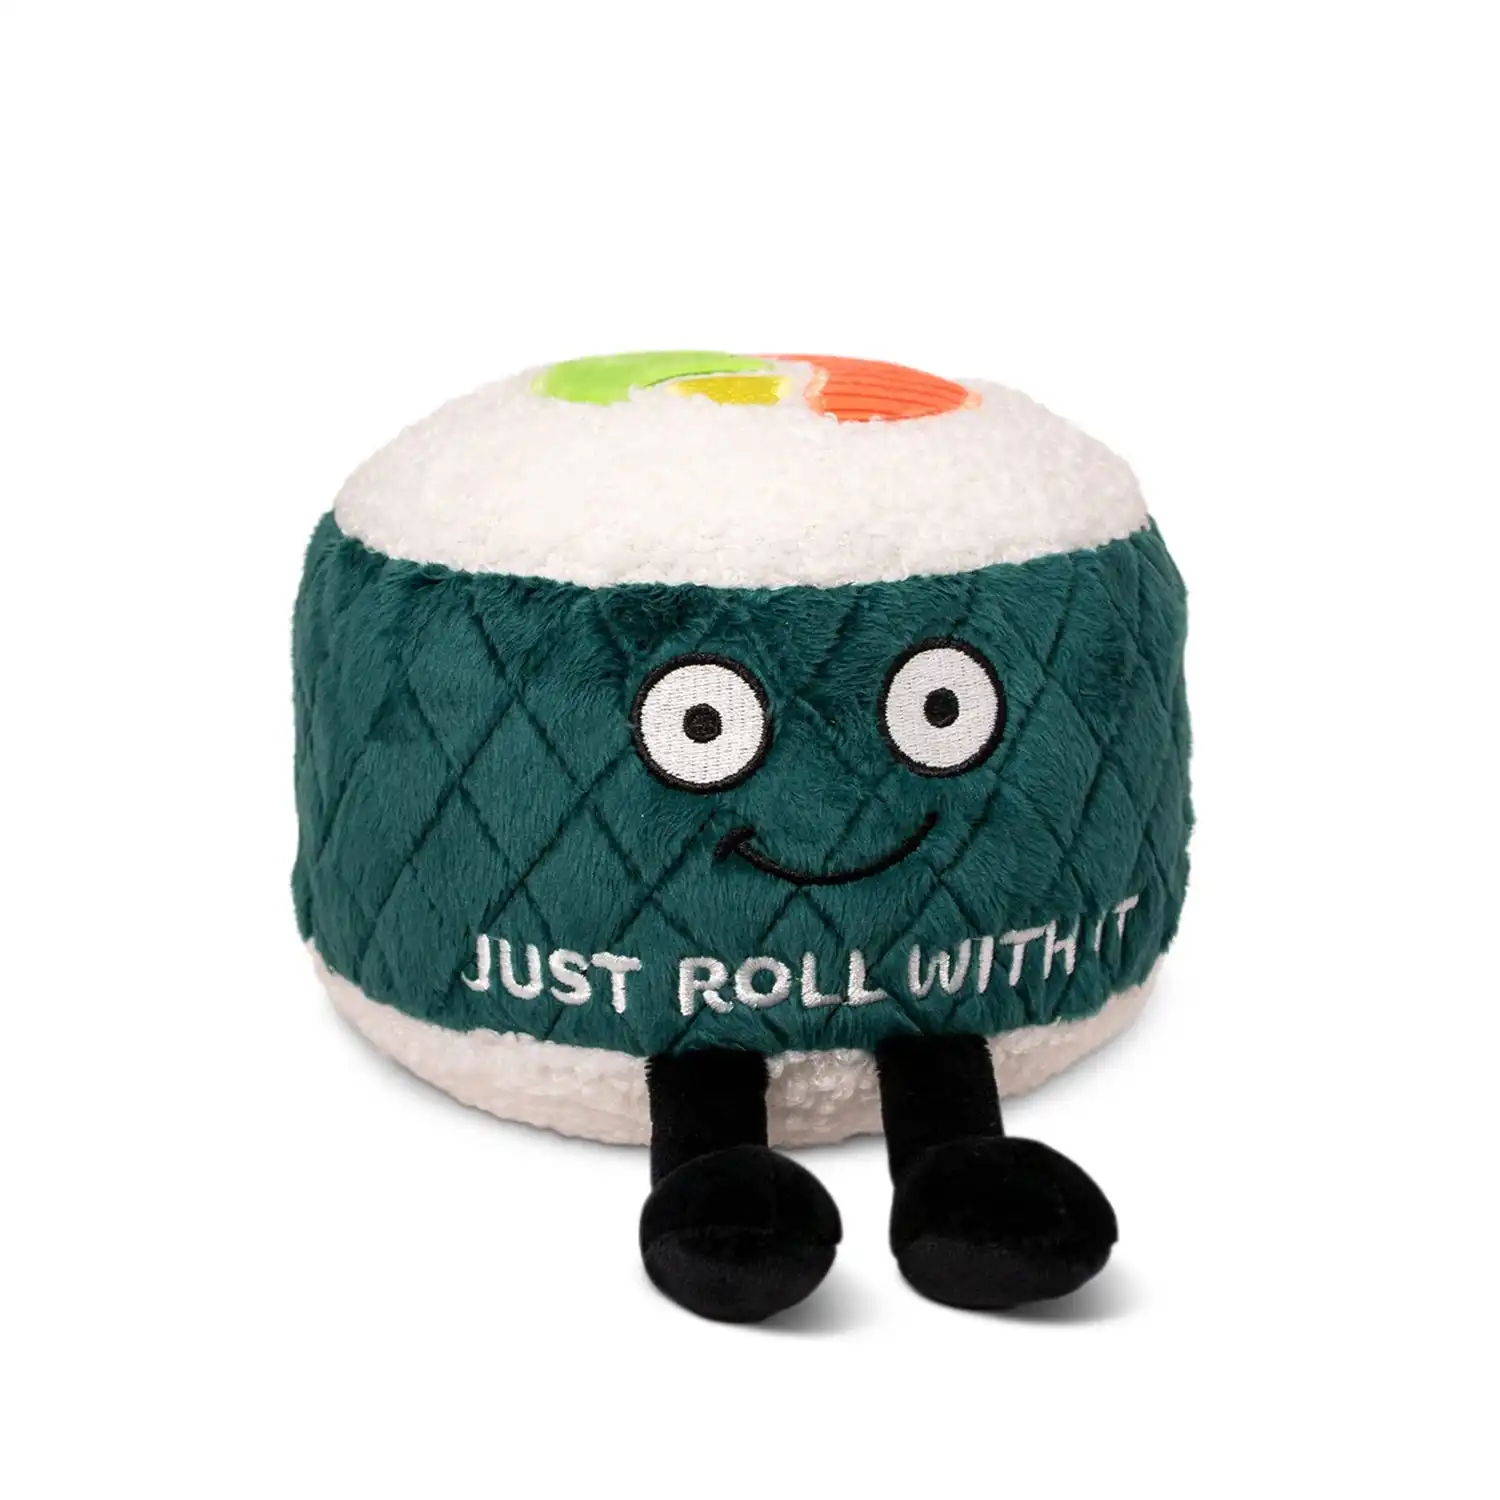 "Just Roll with It" - Sushi Plush